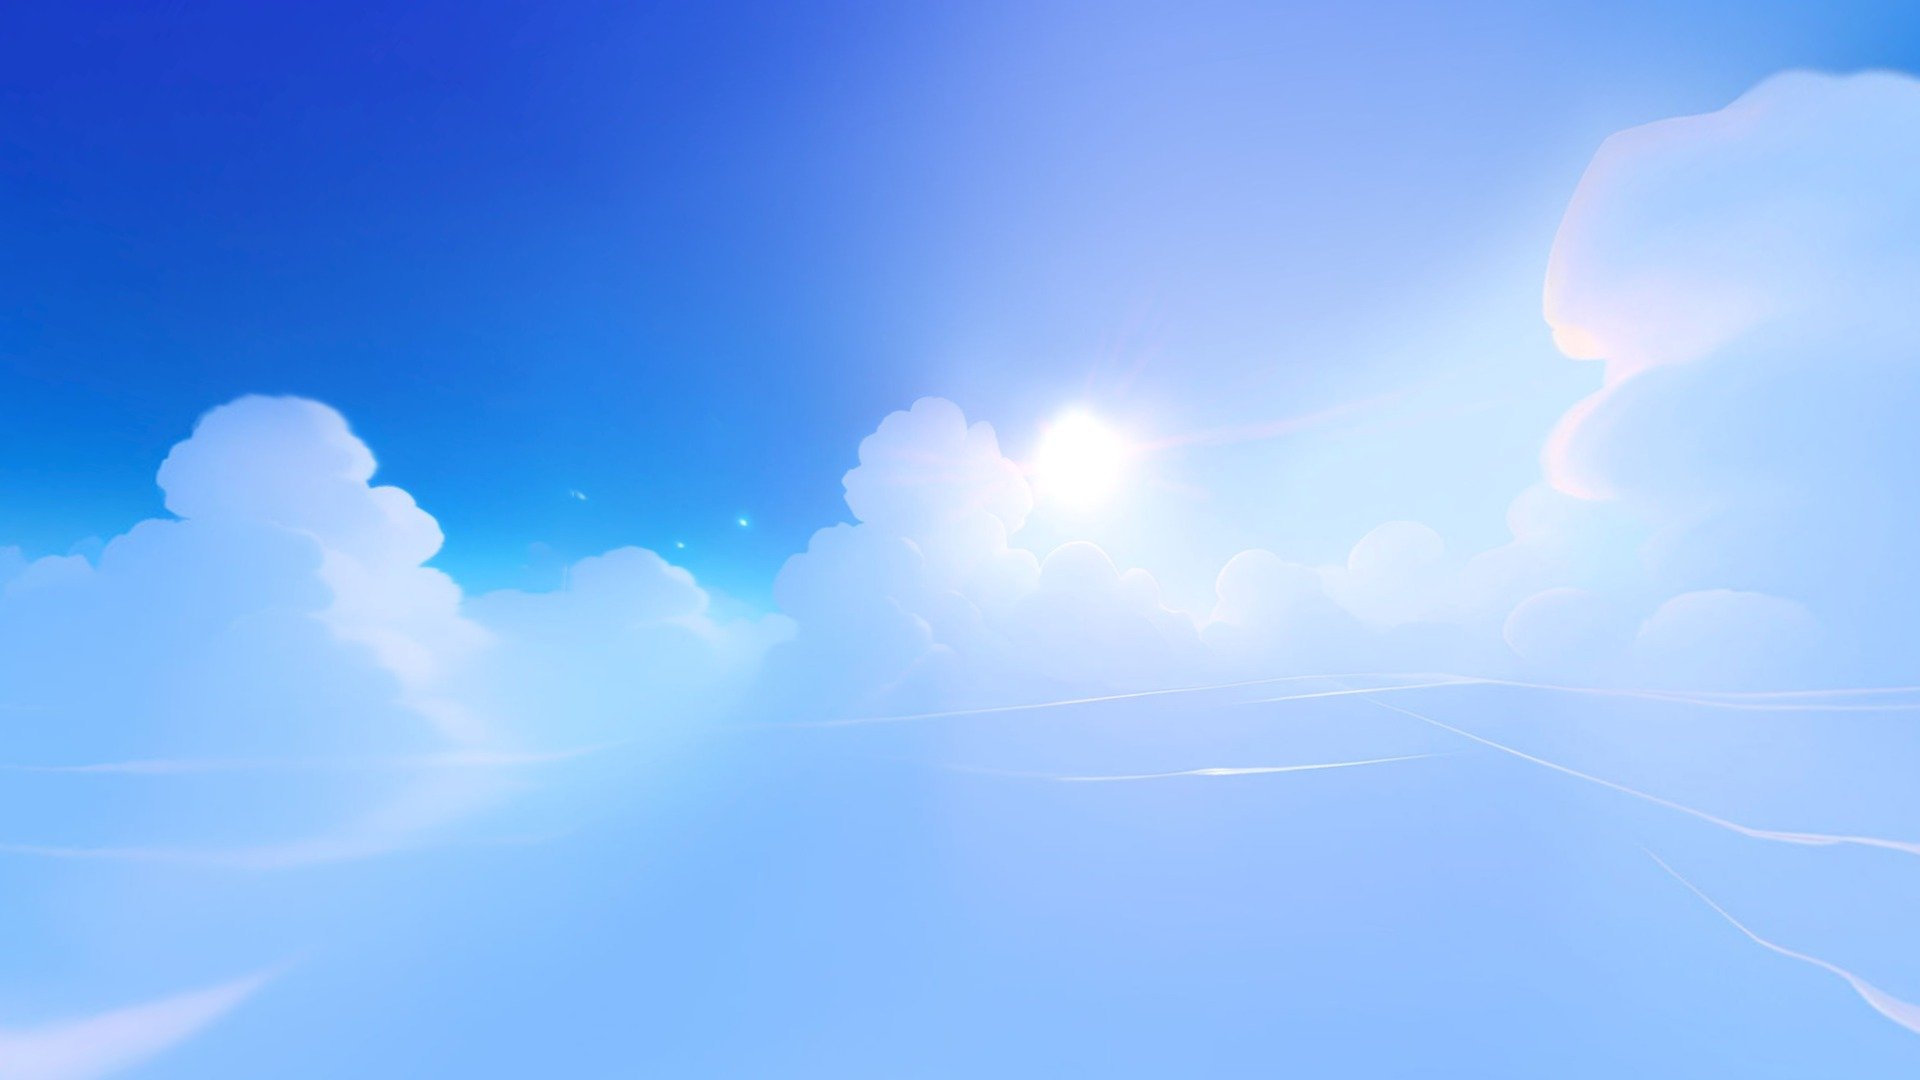 Beautiful stylized dreamy skybox. Perfect for beautiful, stylized environments and your rendering scene.

The package contains one panorama texture and one cubemap texture (png)

panorama texture: 6144 x 3072 

cubemap texture: 6144 x 4608 

Because of this size it is easier to customize more and better details if you want that. 

The sizes can be changed in your graphics program as desired

( textures are under Other available downloads)

used: AI, Photoshop

*-------------Terms of Use--------------

Commercial use of the assets provided is permitted but cannot be included in an asset pack or sold at any sort of asset/resource marketplace or be shared for free* - Stylized Cloudy Sky - Buy Royalty Free 3D model by stylized skybox (@skybox_) 3d model